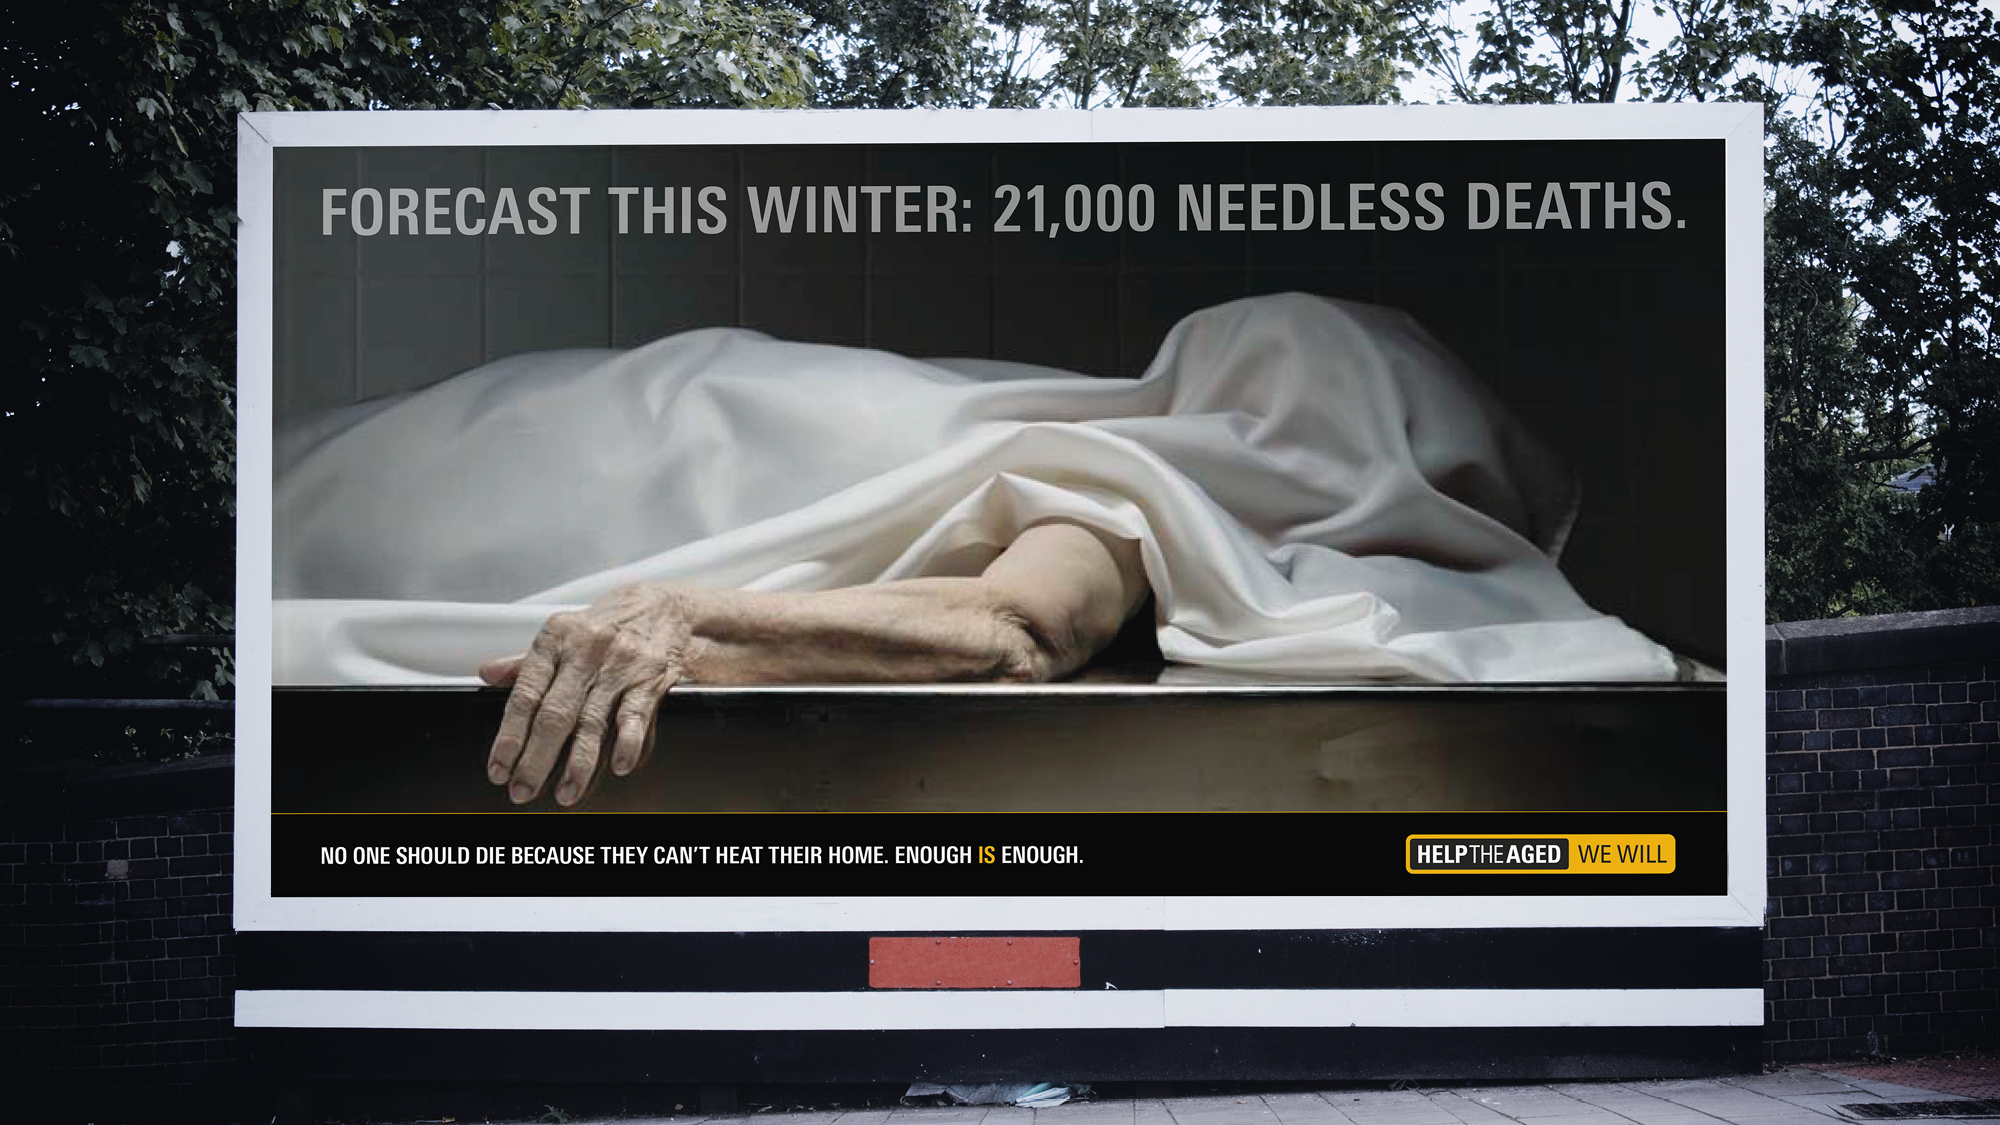 Entity-3-Three-Brand-Design-Agency-Sydney-Help-the-Aged-2-winter-deaths-campaign-ooh-advertising